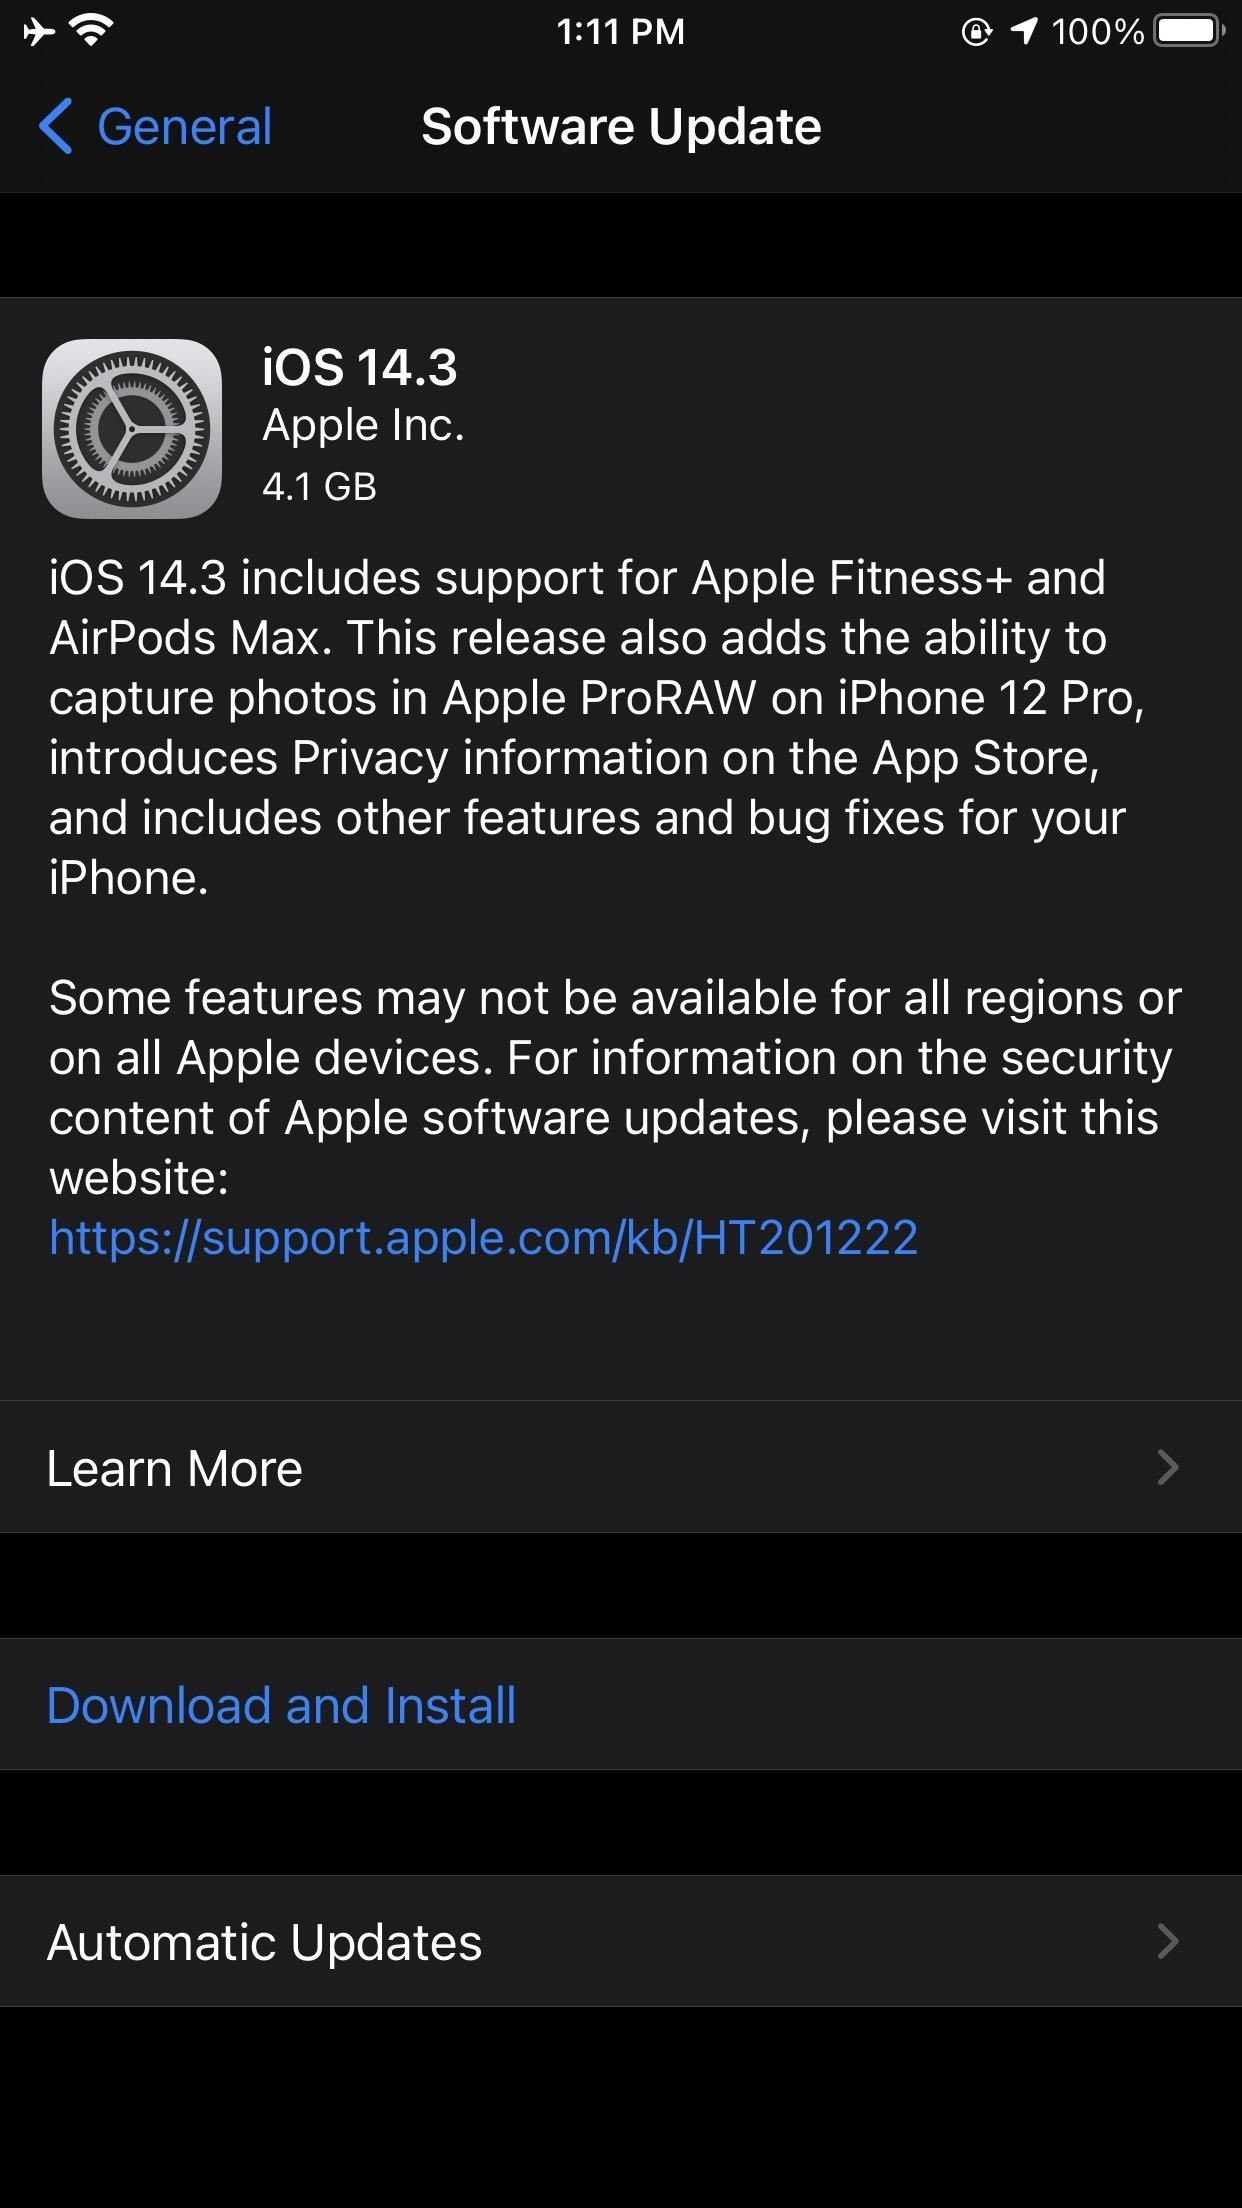 Apple's iOS 14.3 Release Candidate 2 Available for iPhone, Adds Support for App Clips, AirPods Max & Apple Fitness+